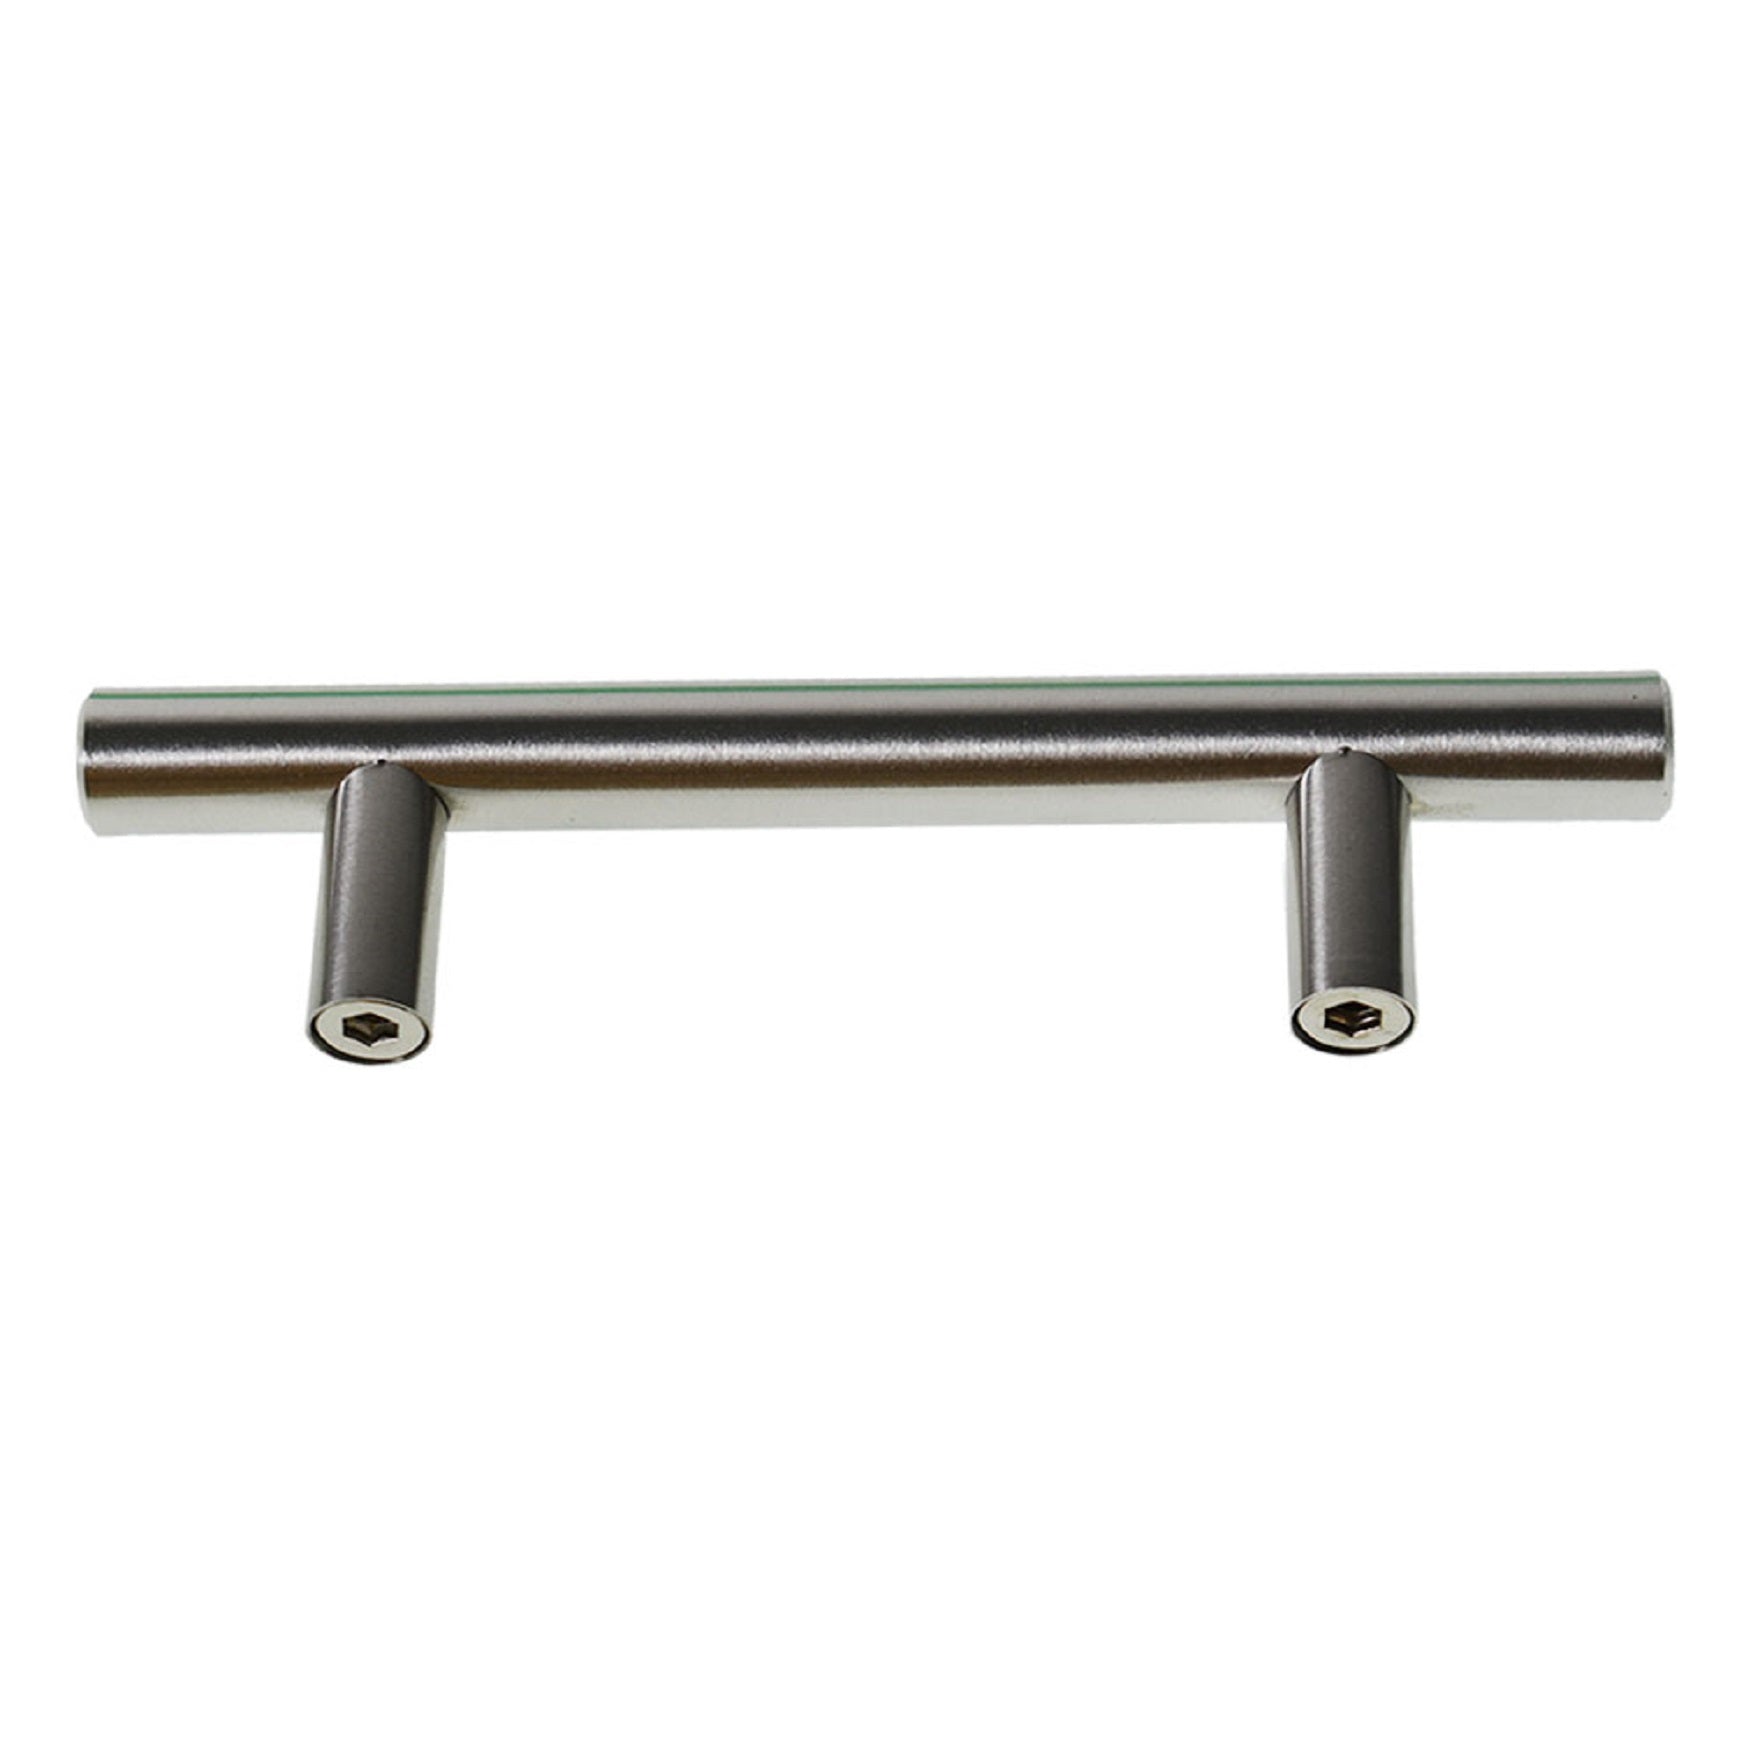 findmall  20 Pack - 5 Inch Cabinet Handle Stainless Steel Drawer Pulls Cabinet Pulls Bar Kitchen Handles 3 Inch Hole Center Strong and Durable FINDMALLPARTS